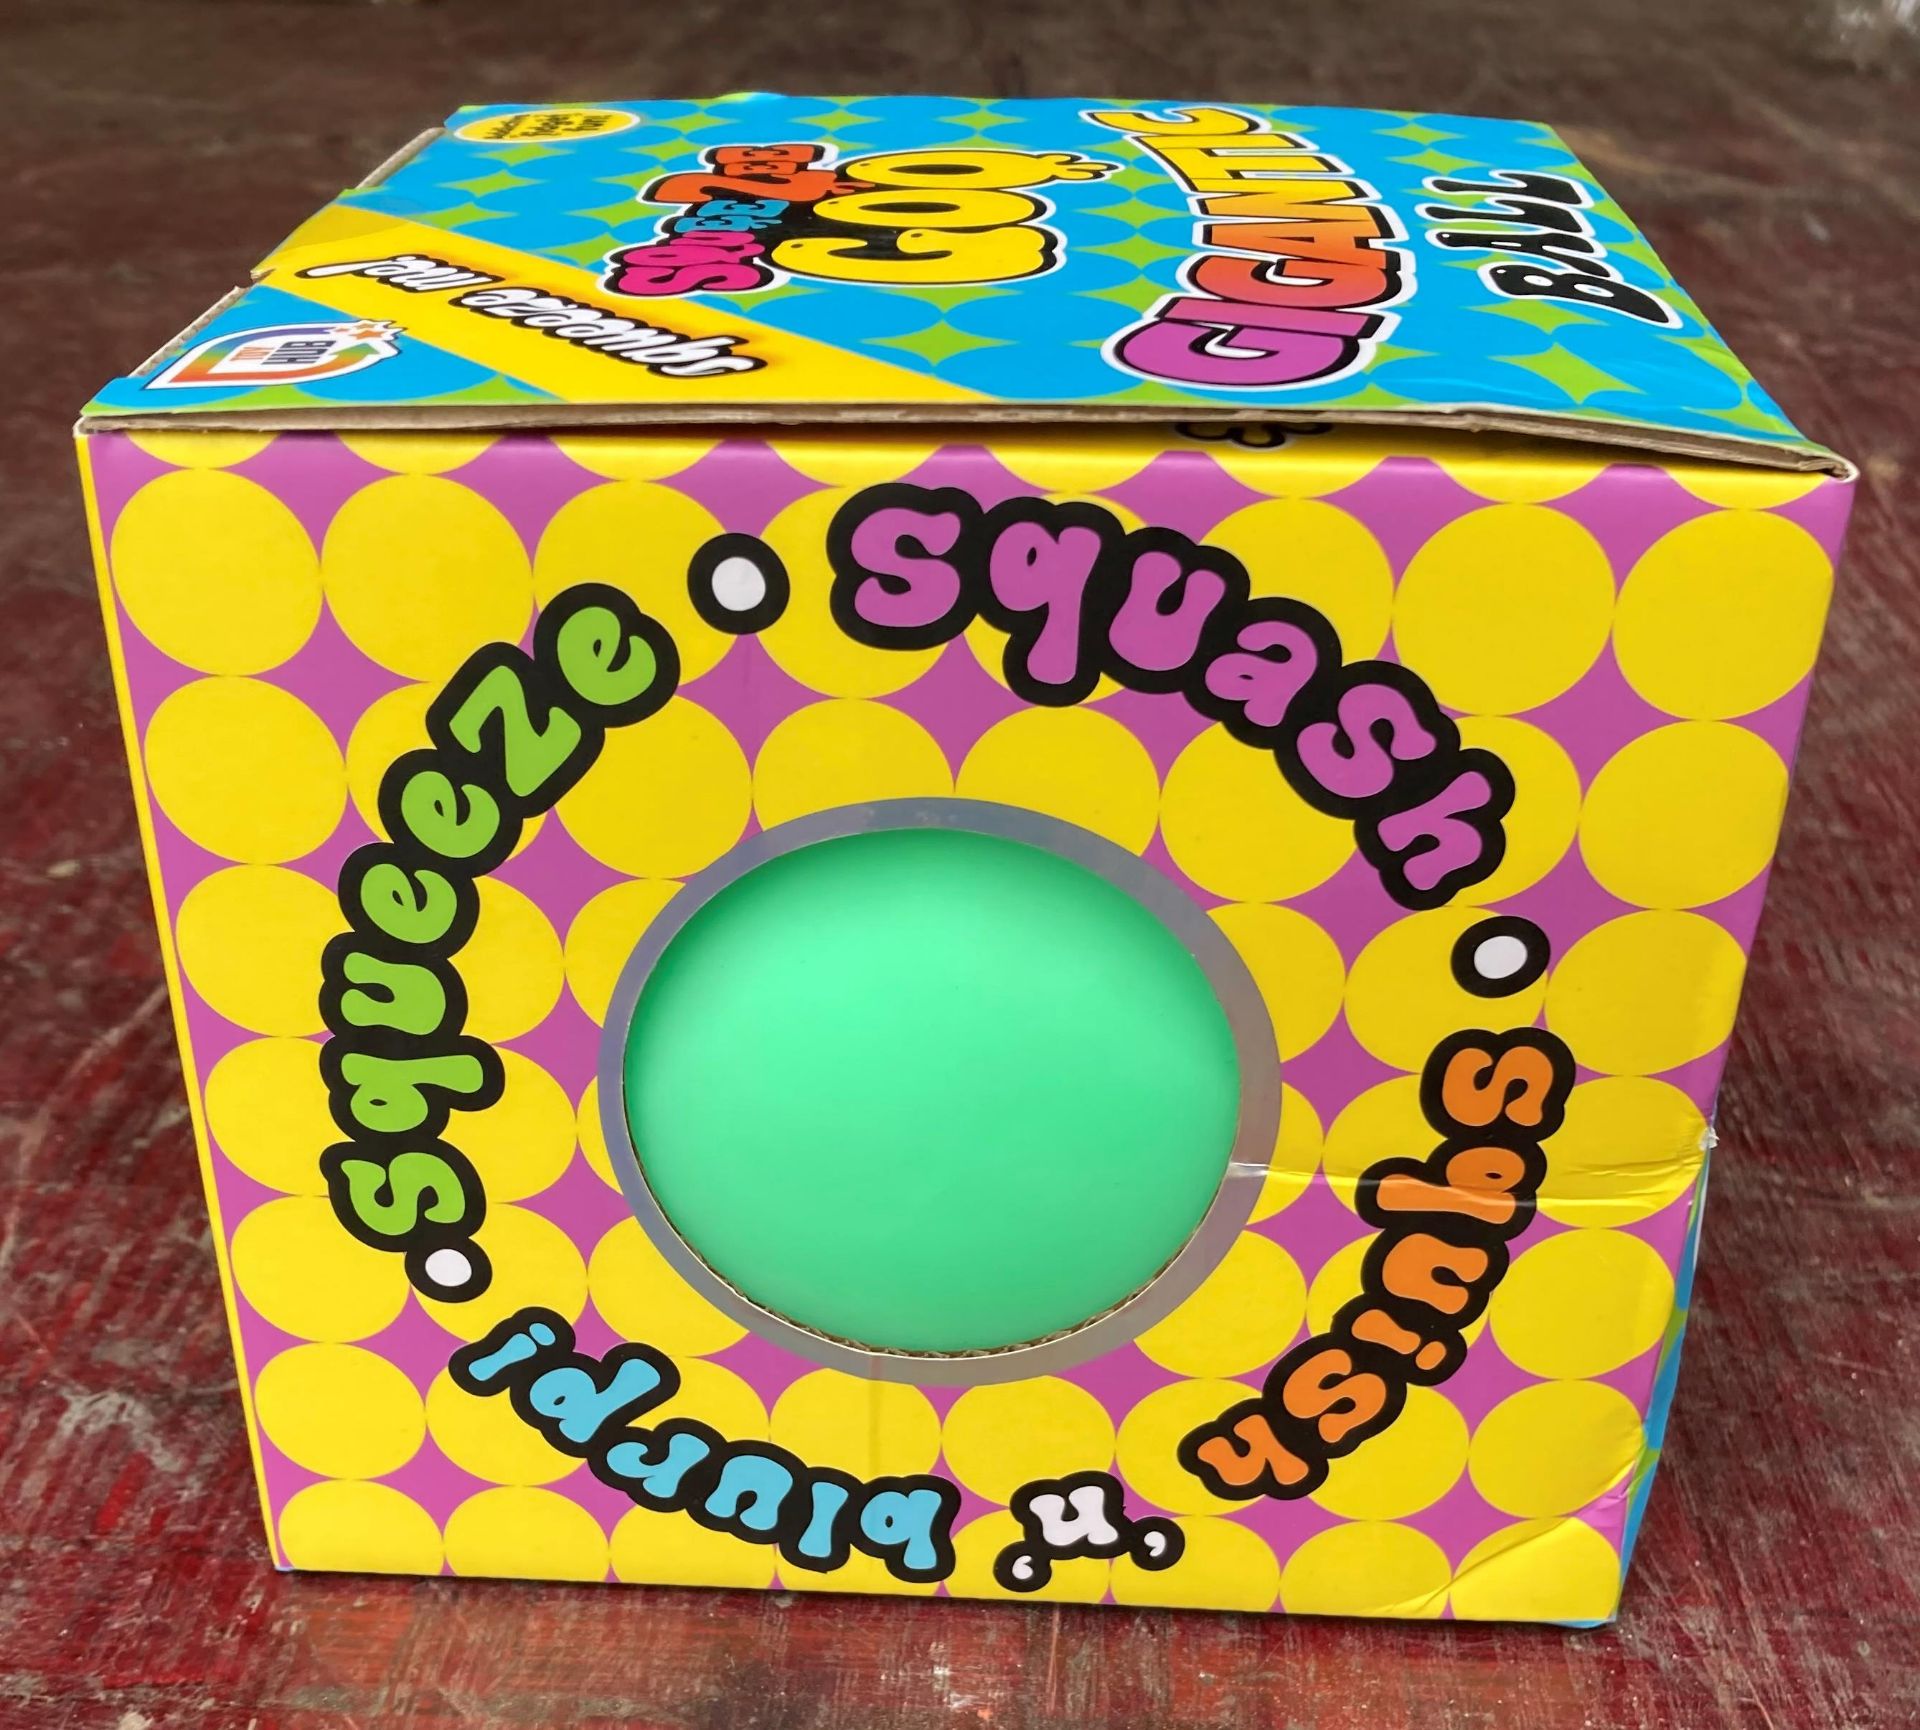 72 x Gigantic Goo squeeze balls/fidget toys (6 x outer boxes) (saleroom location: container 7) - Image 2 of 4